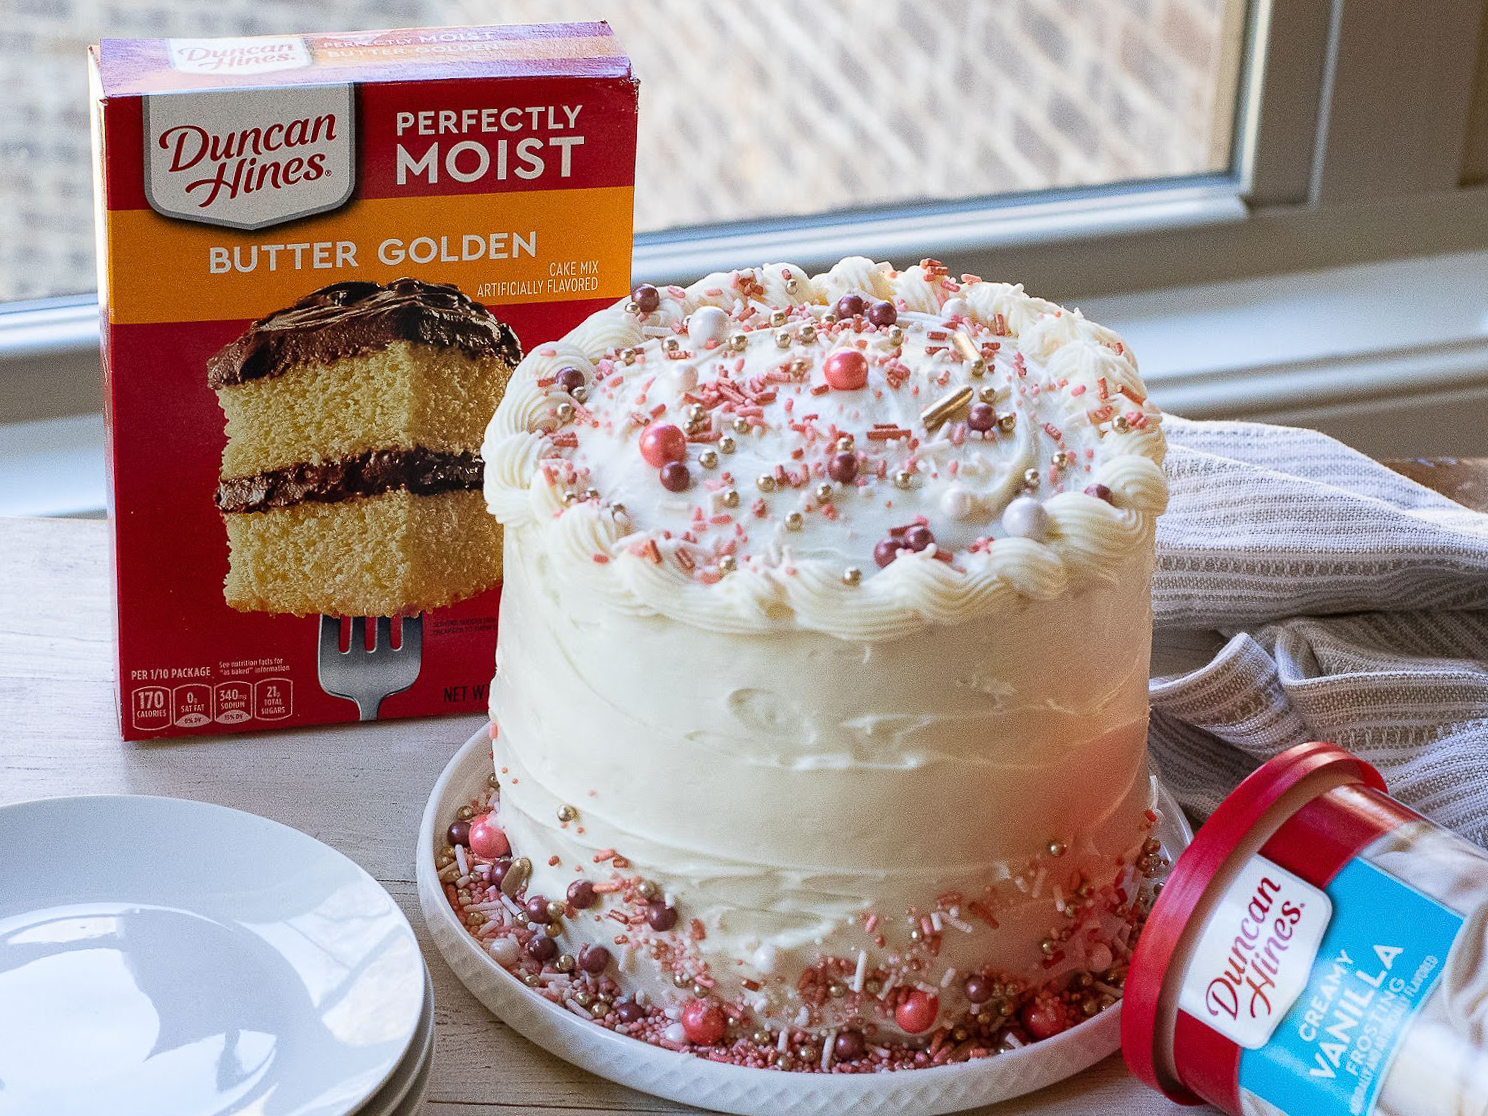 Duncan Hines Cake Mix As Low As 20¢ At Publix – Plus Cheap Frosting & Brownie Mix